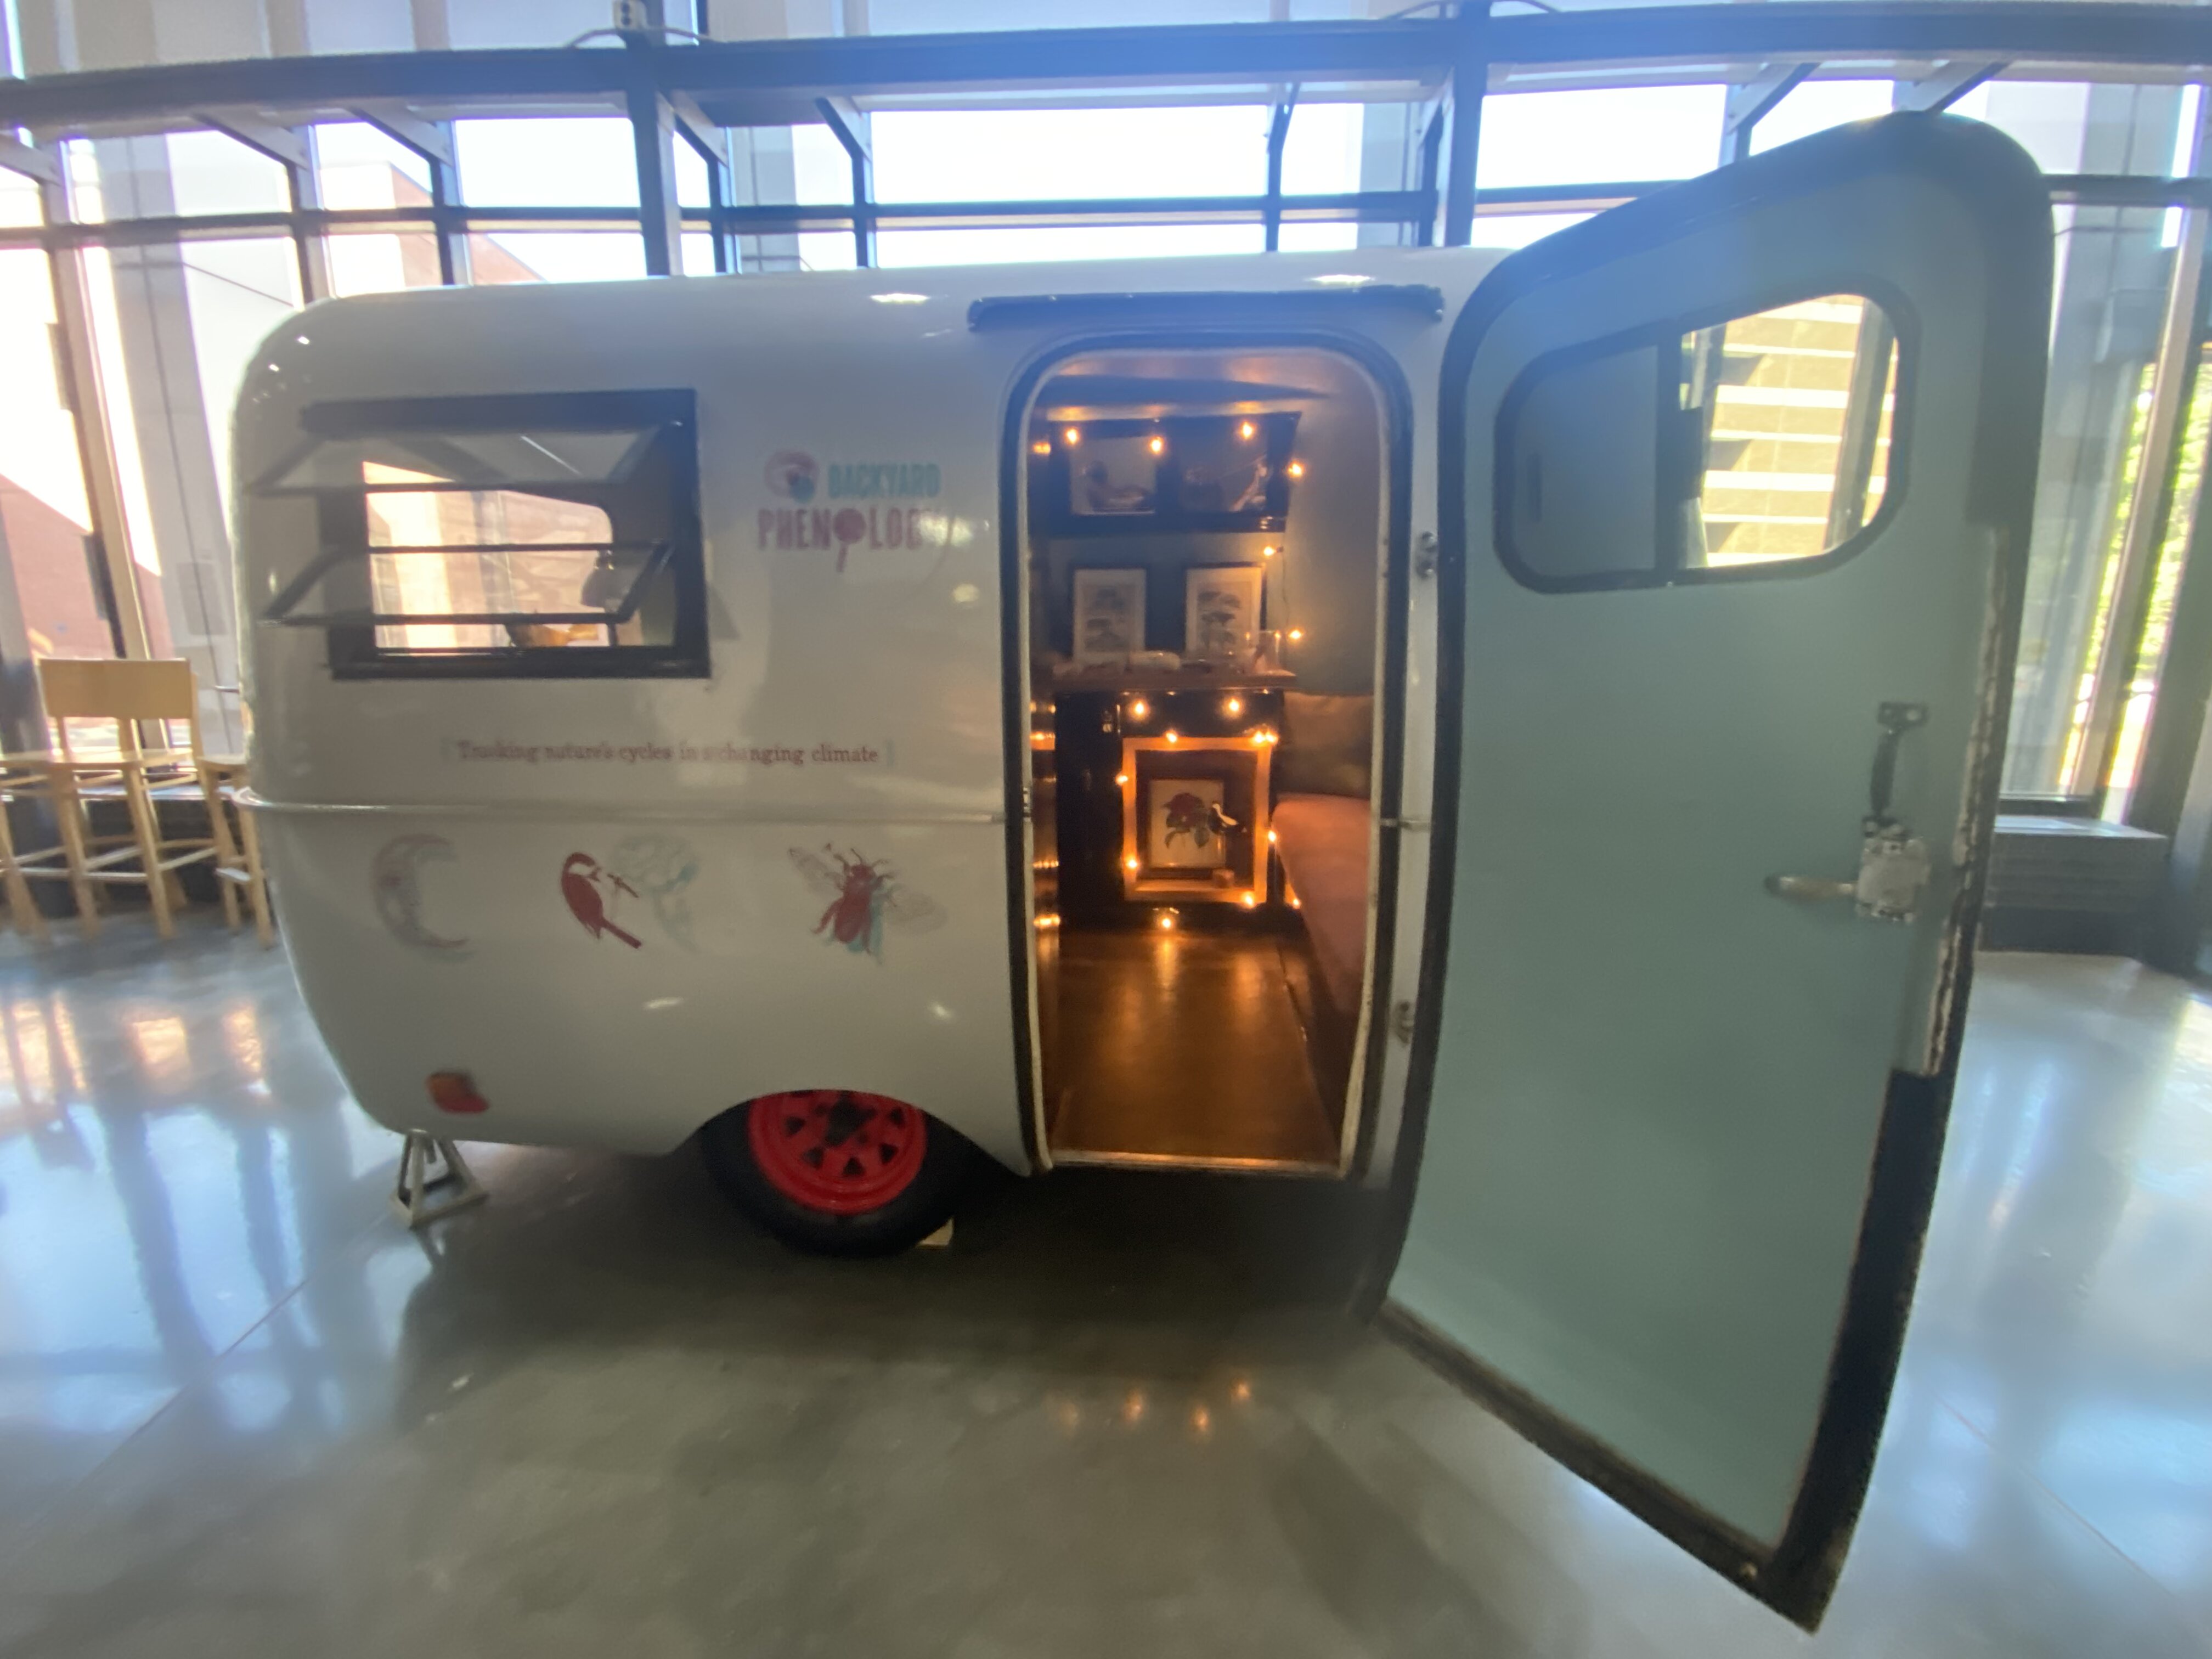 Silver camper in a gallery space, the door is open and interior lights welcome visitors